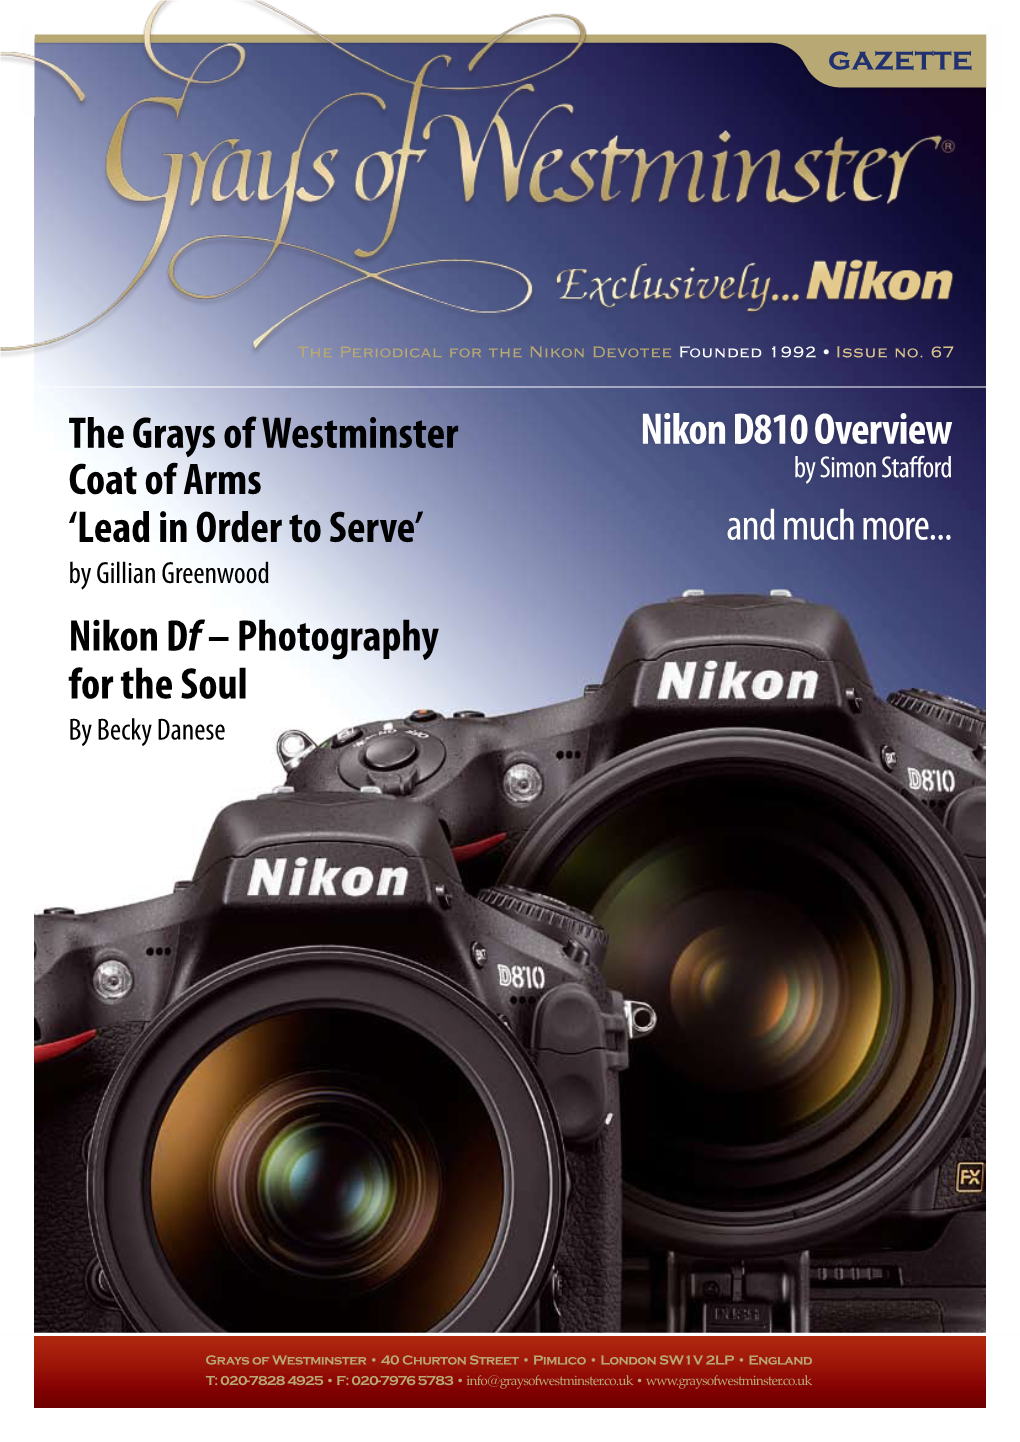 Nikon D810 Overview and Much More... the Grays of Westminster Coat Of